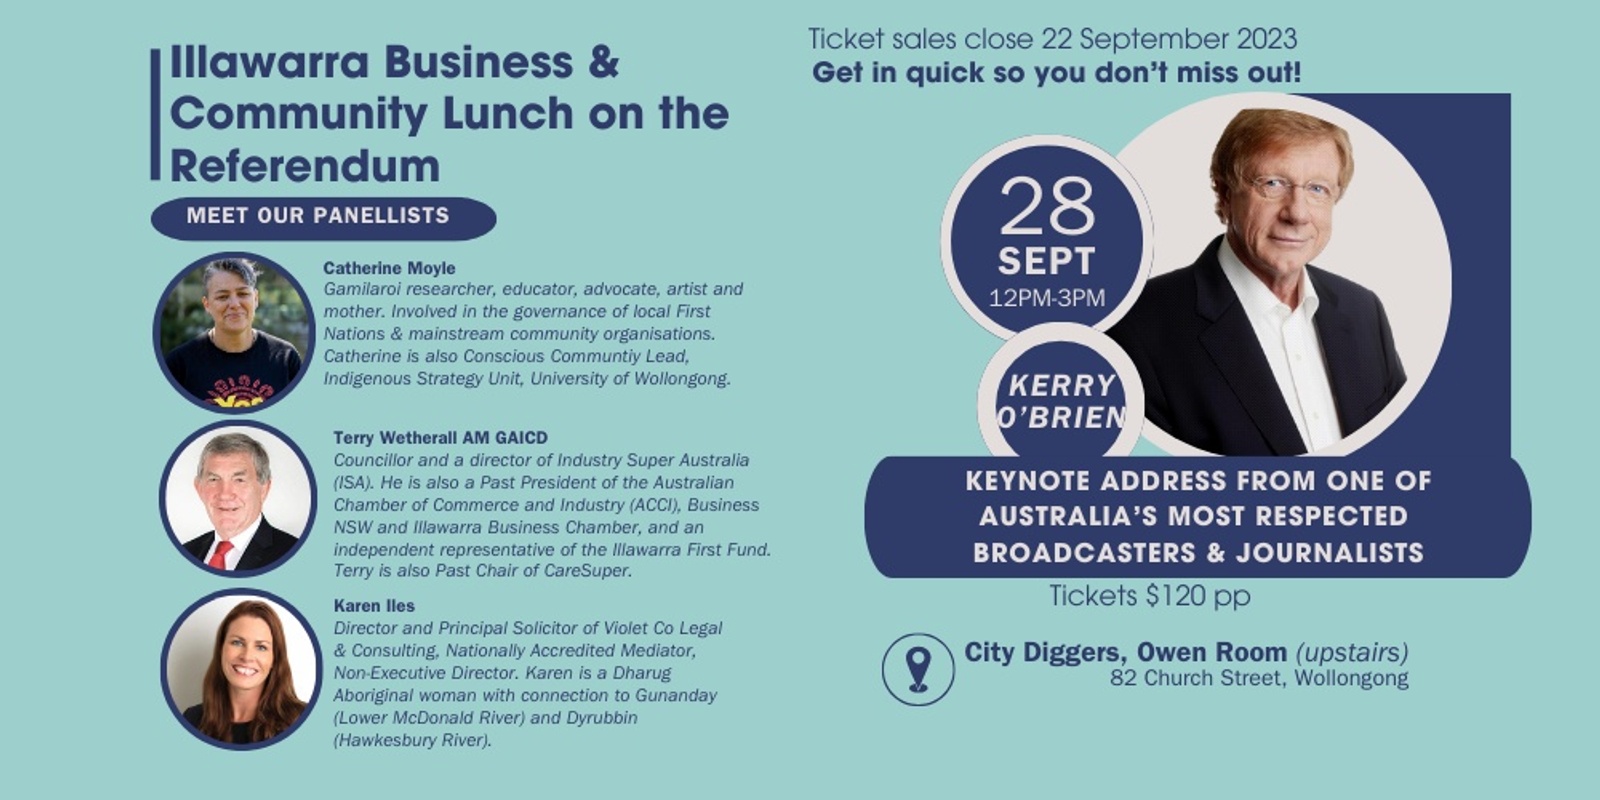 Banner image for Illawarra Business & Community Lunch on the Referendum